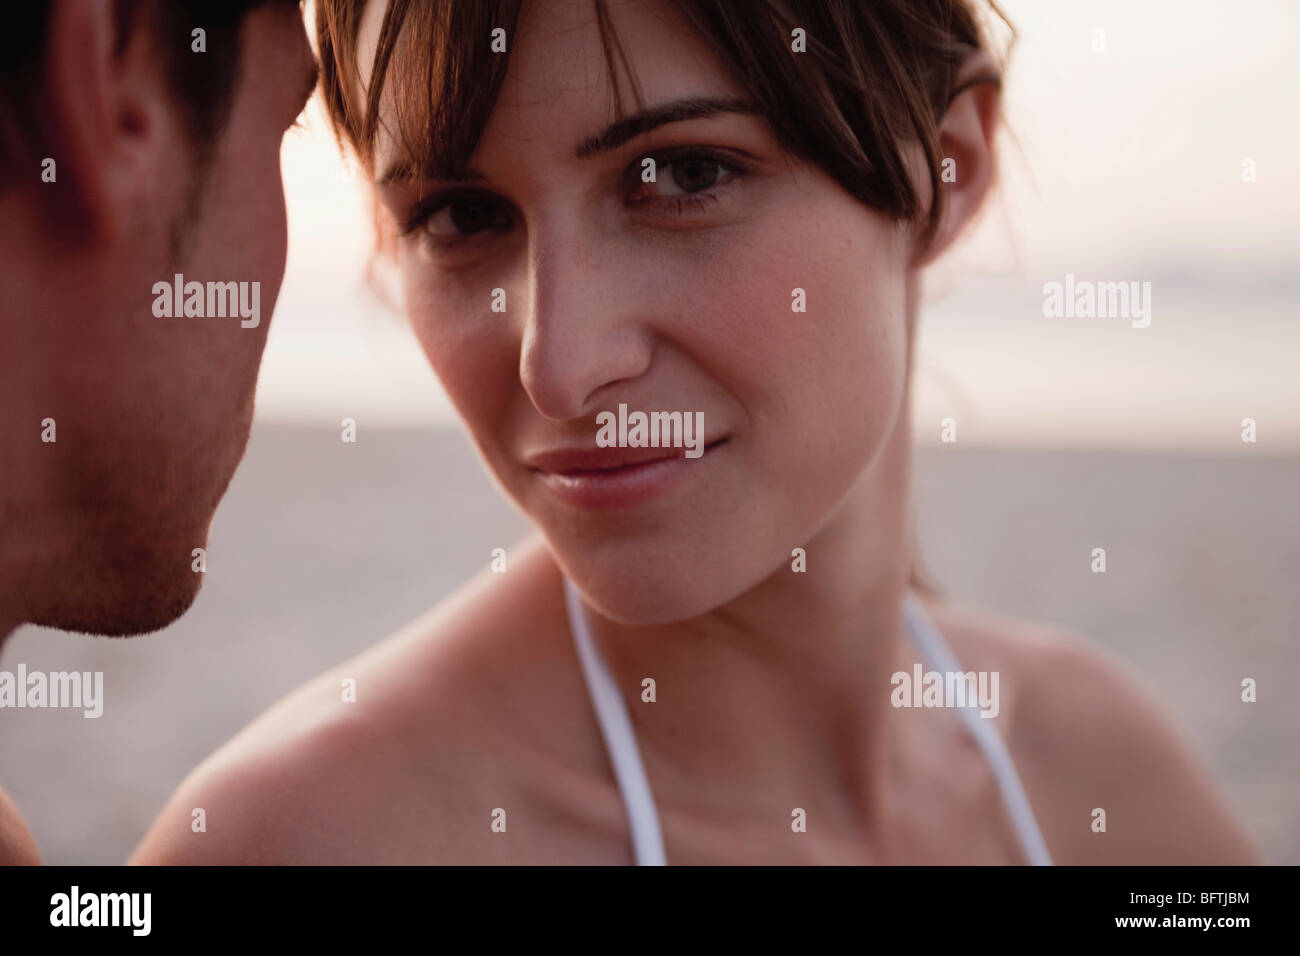 woman next to a man looking at viewer Stock Photo